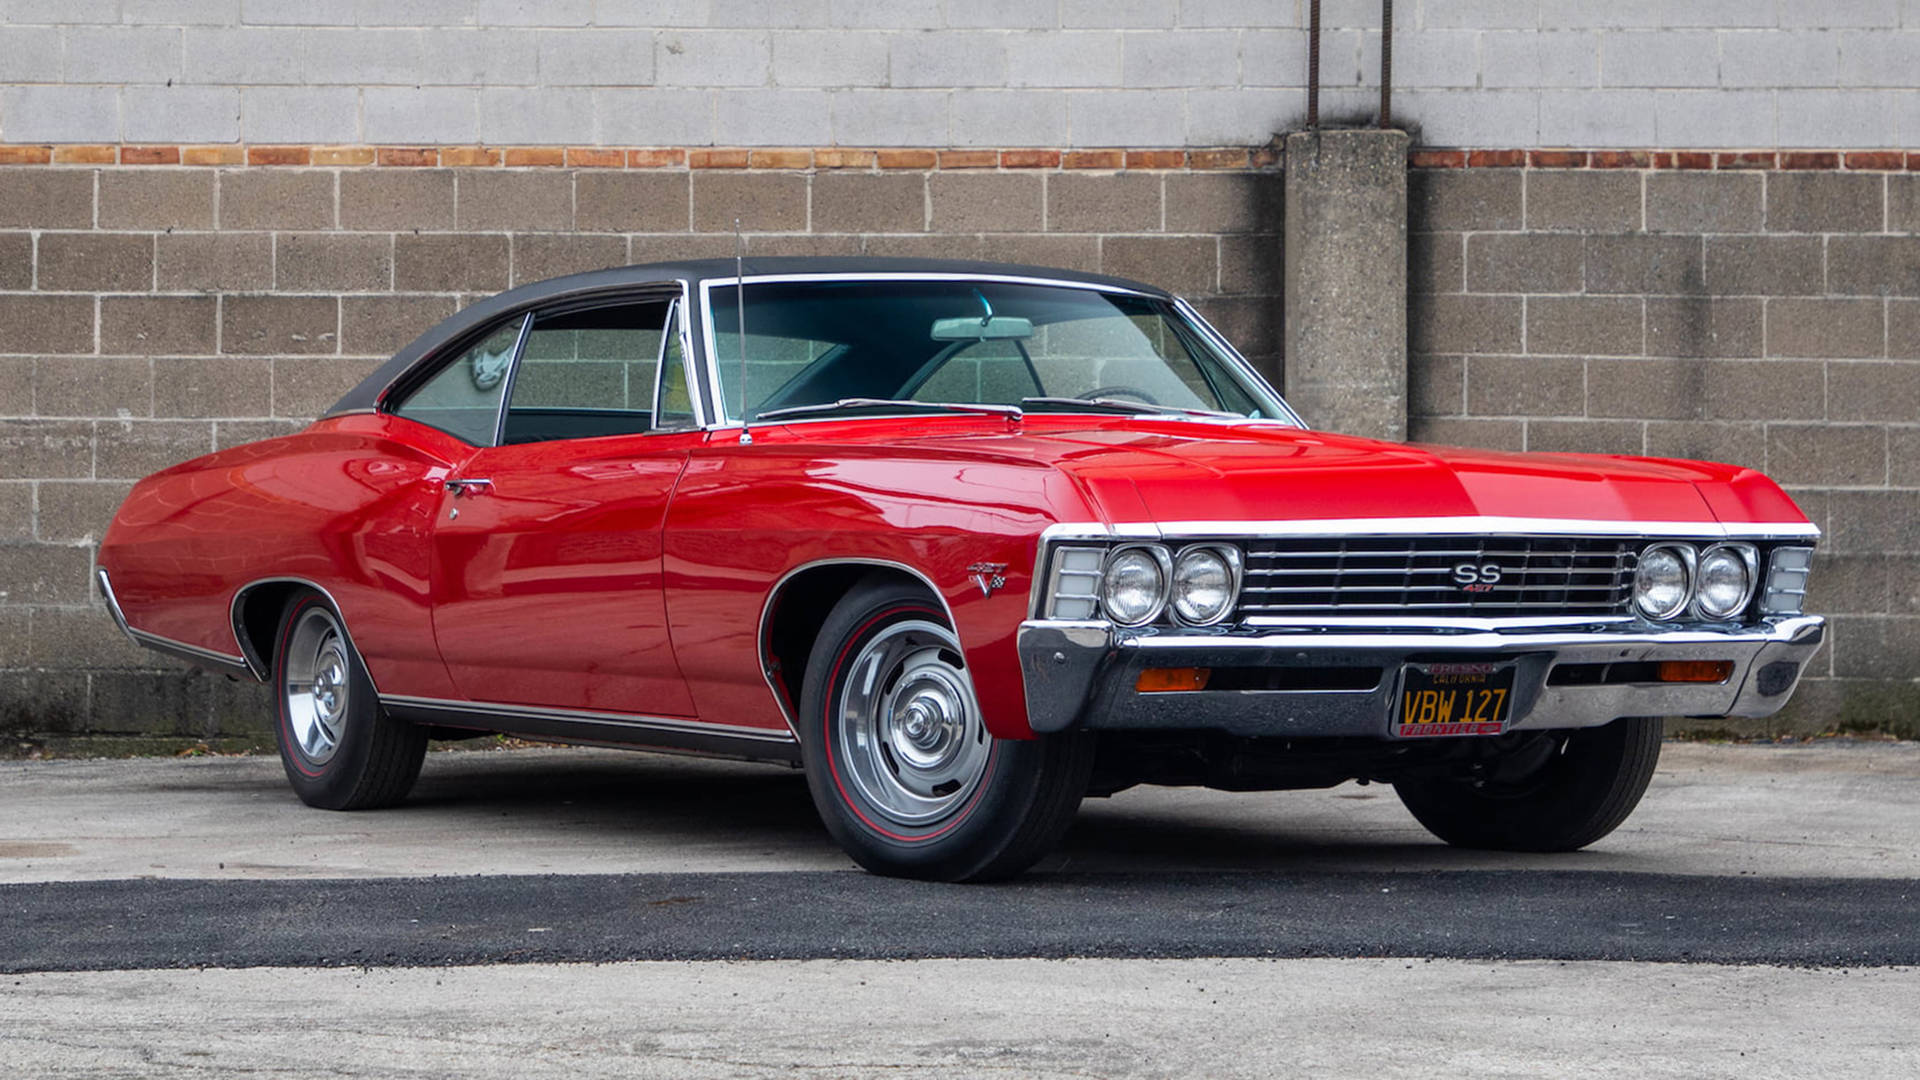 Classic Perfection - Red 1967 Chevrolet Impala Background